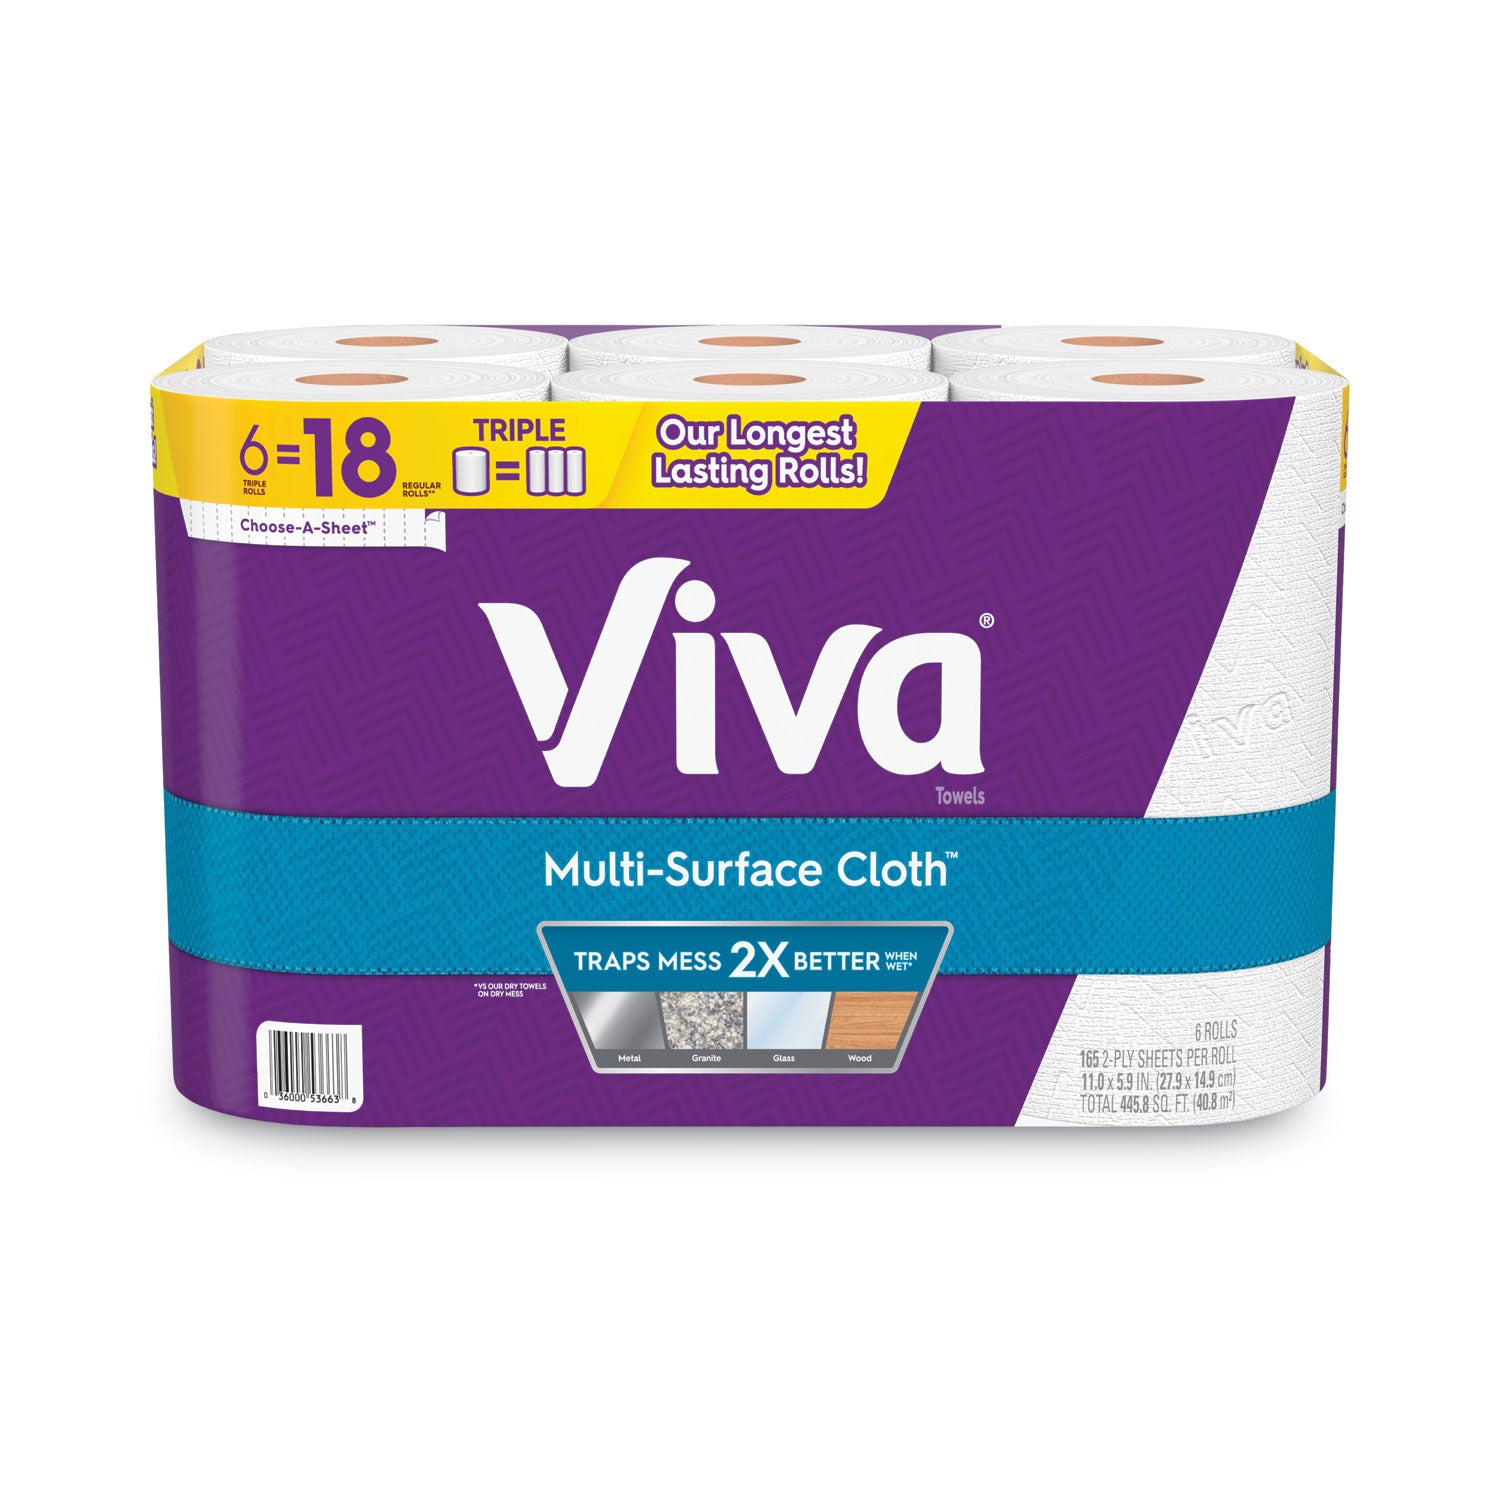 multi-surface-cloth-choose-a-sheet-kitchen-roll-paper-towels-2-ply-11-x-59-white-165-roll-6-rolls-pack-4-packs-carton_kcc53663 - 1